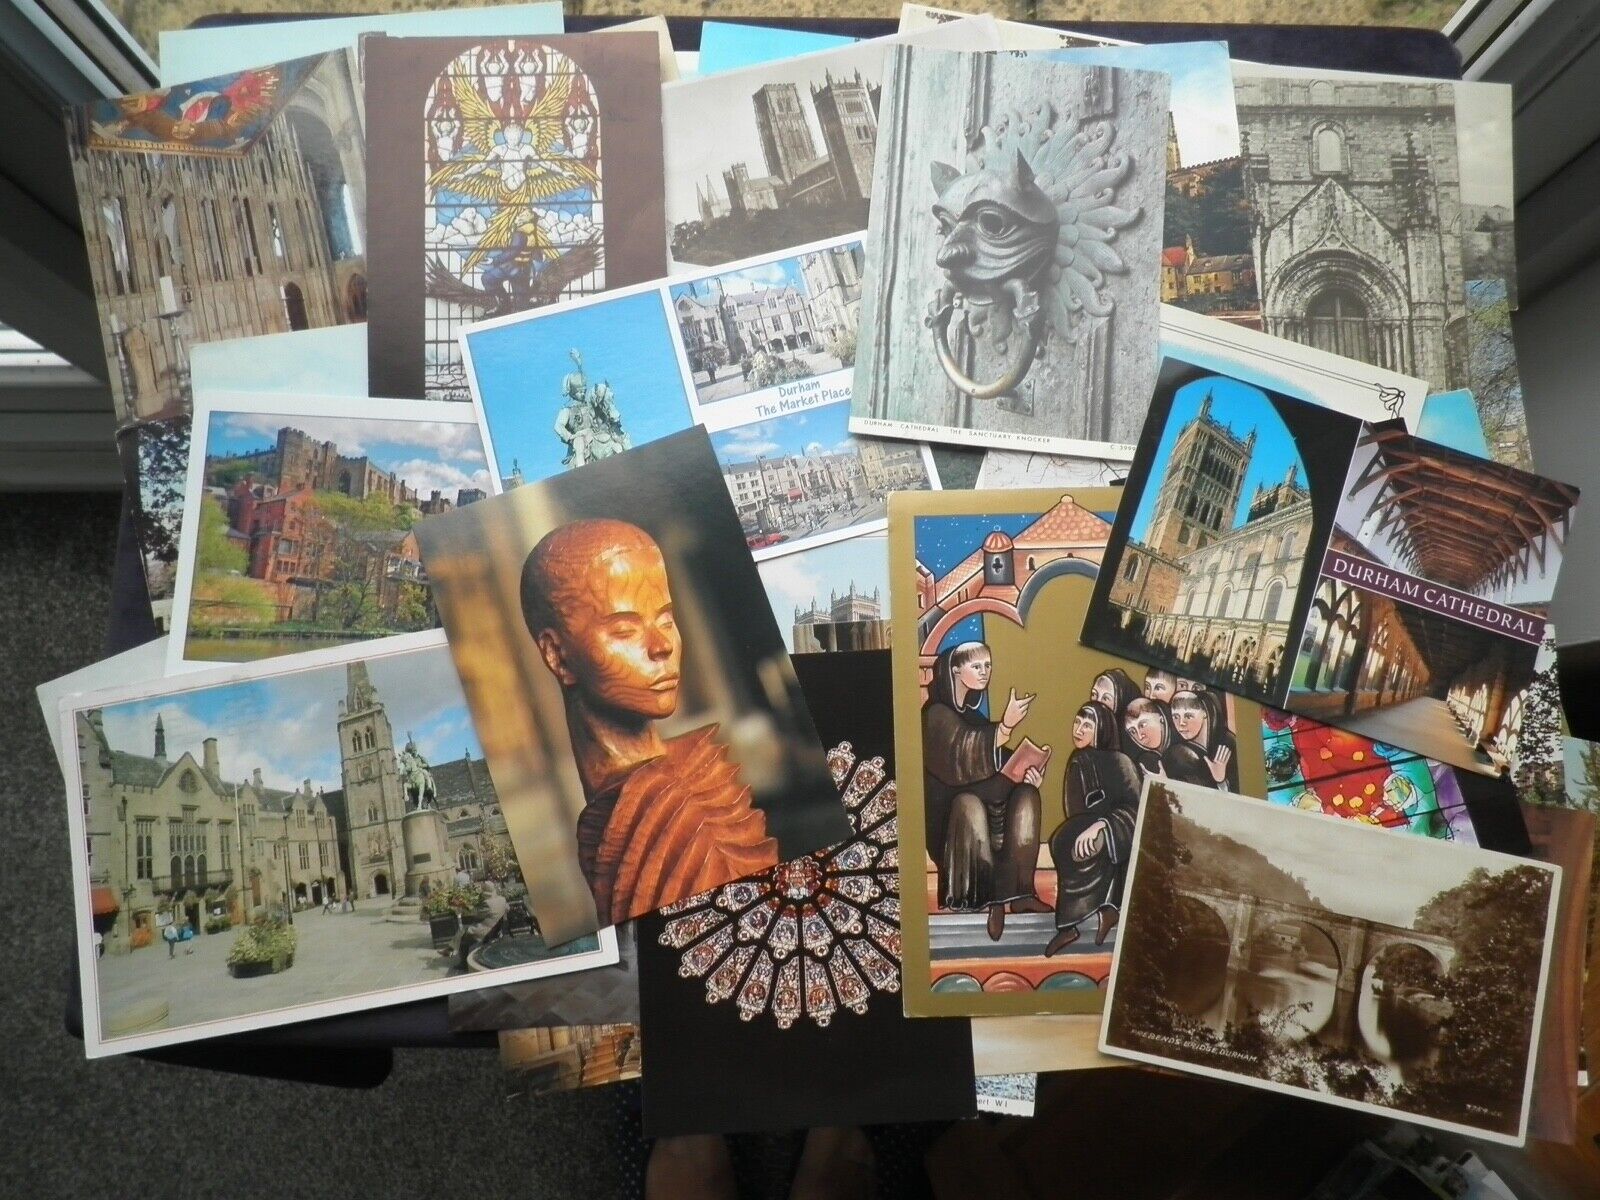 House Clearance - 50 POSTCARDS DURHAM, CATHEDRAL, CASTLE, PREBENDS BRIDGE, ROYAL AIR FORCE WINDOW